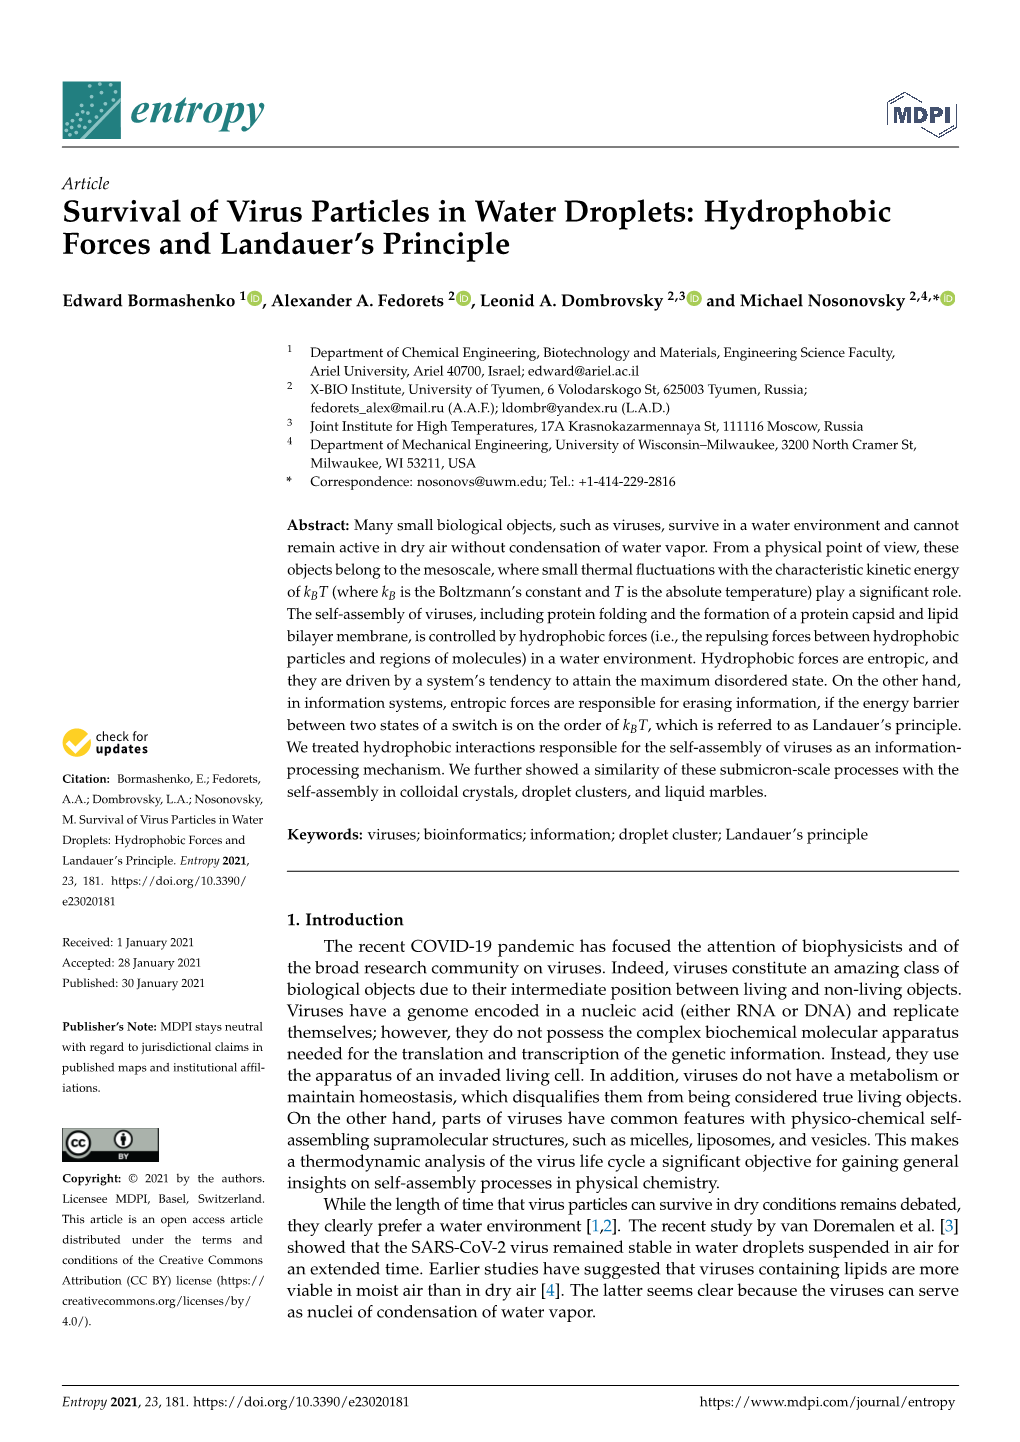 Survival of Virus Particles in Water Droplets: Hydrophobic Forces and Landauer’S Principle